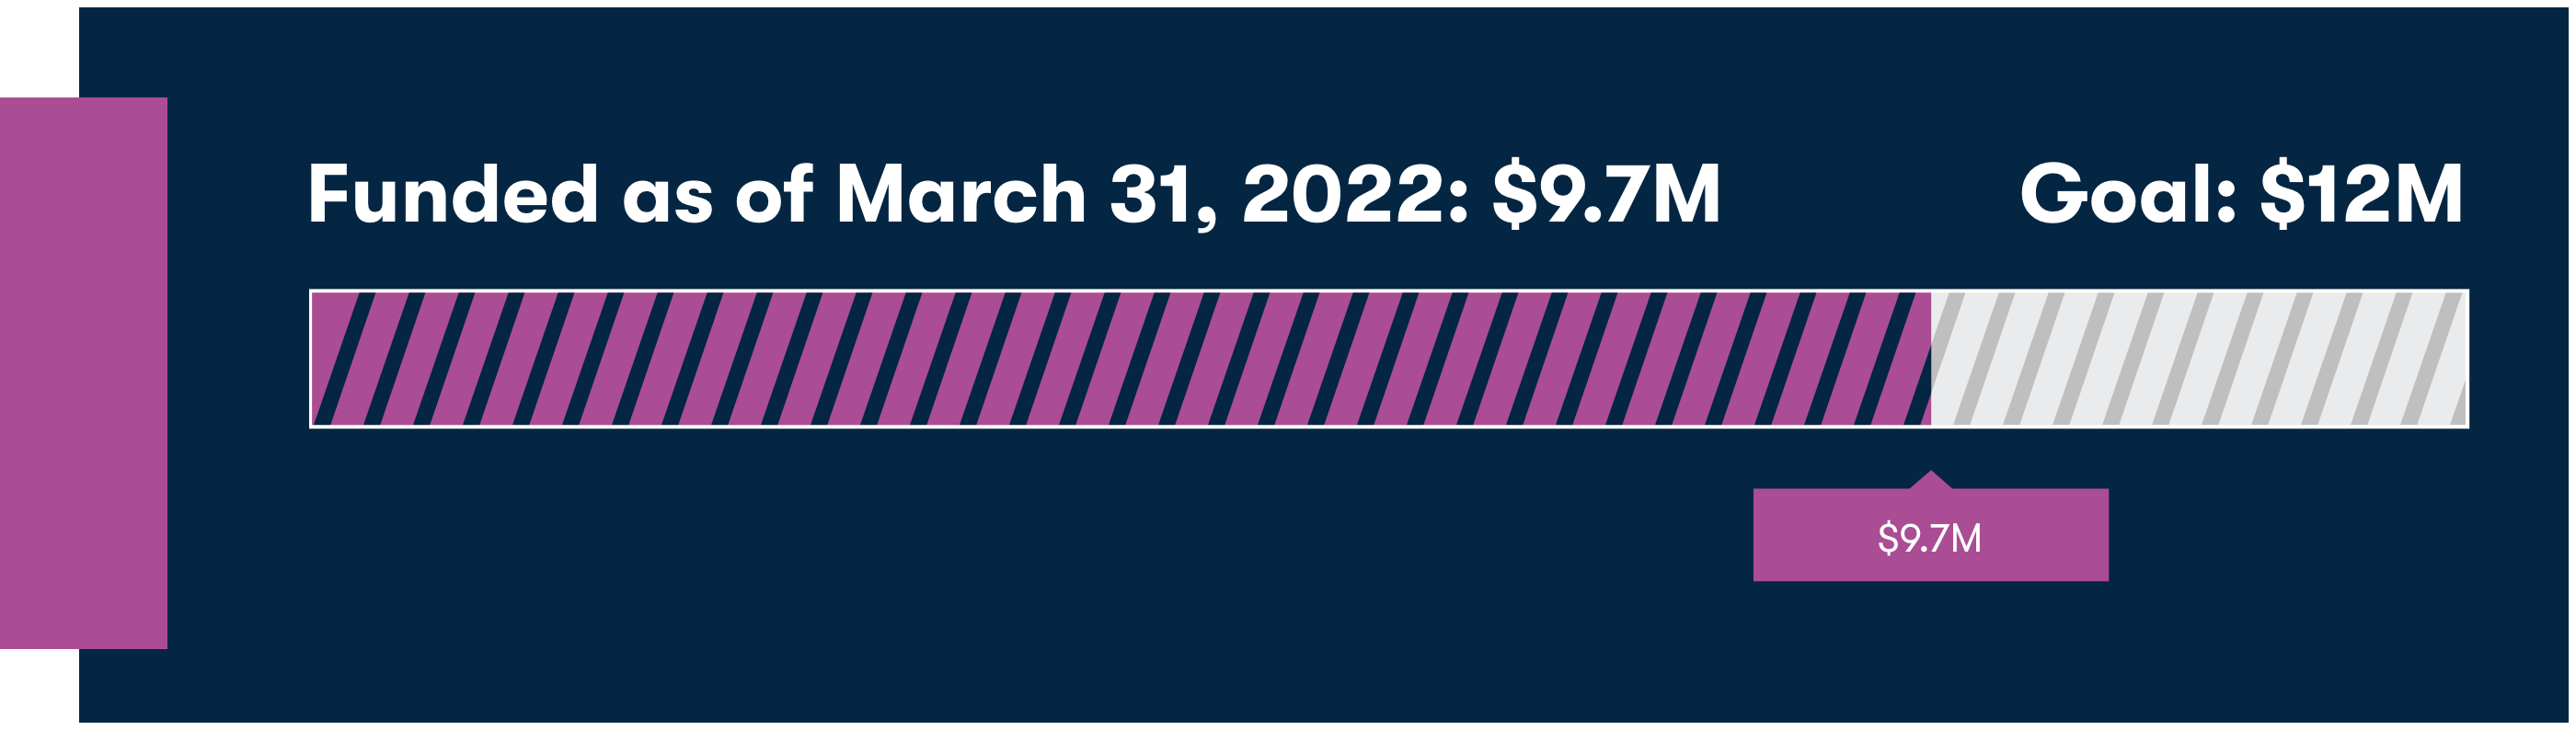 A graph showing a progress bar at $9.7M saying Funded as of March 31, 2022 and Goal: $12M